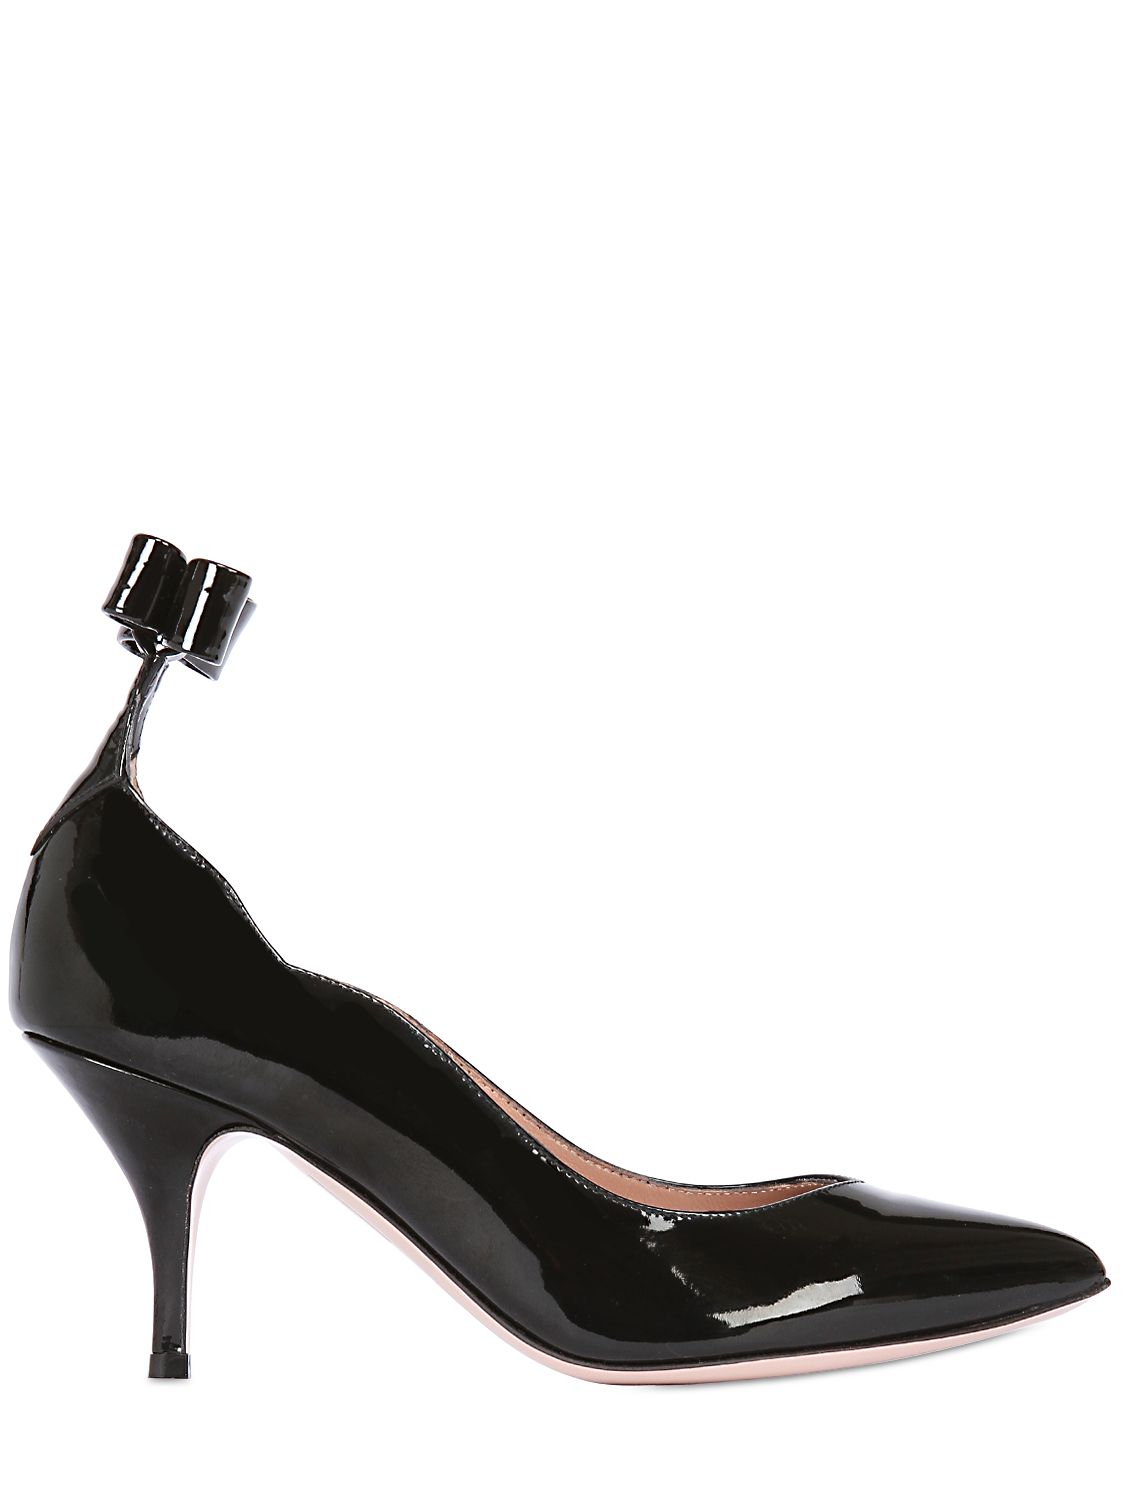 Lyst - Red Valentino 70Mm Patent Leather Bow Pumps in Black